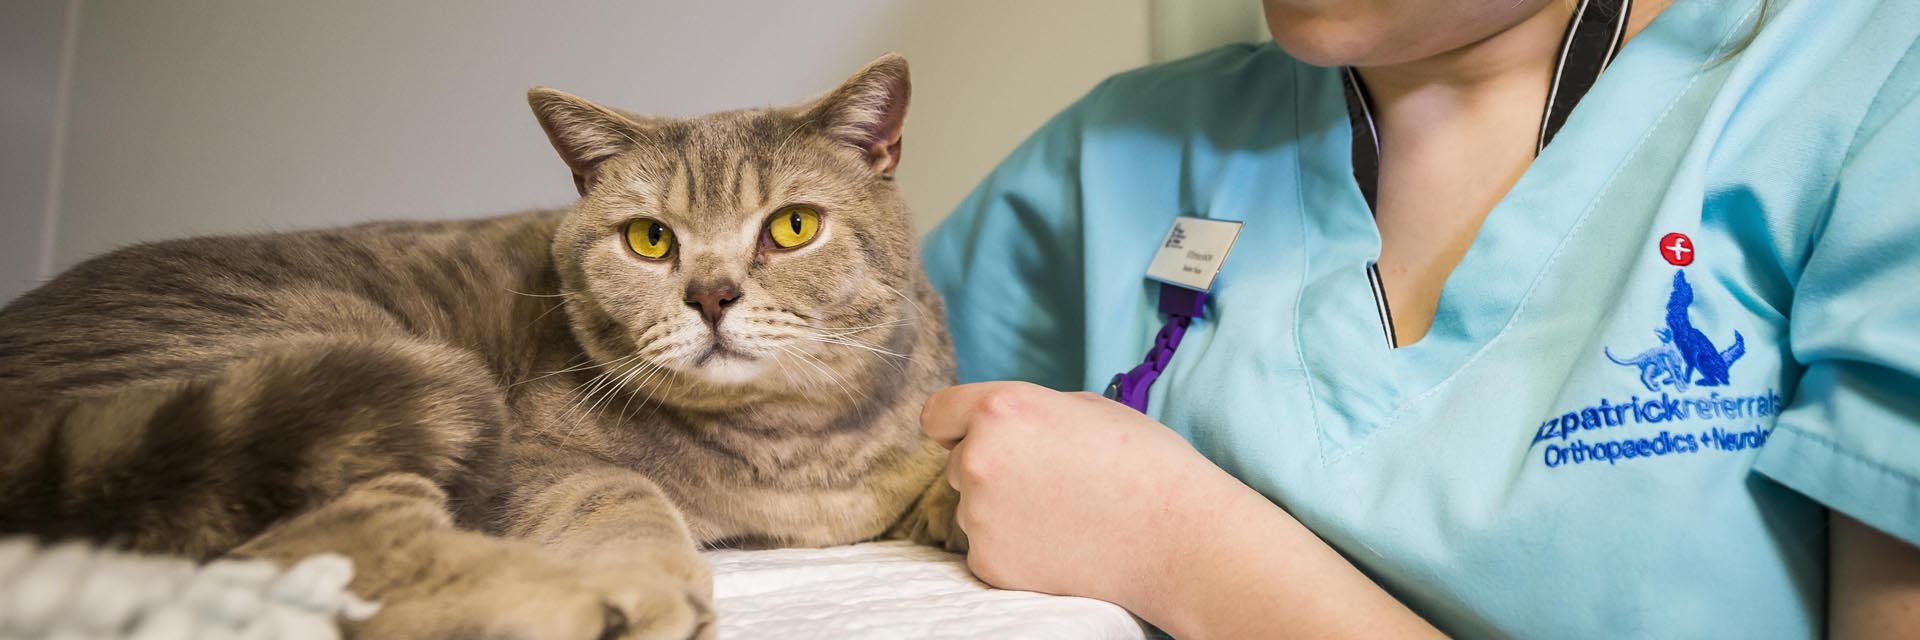 Feline patient being cared for by a nurse